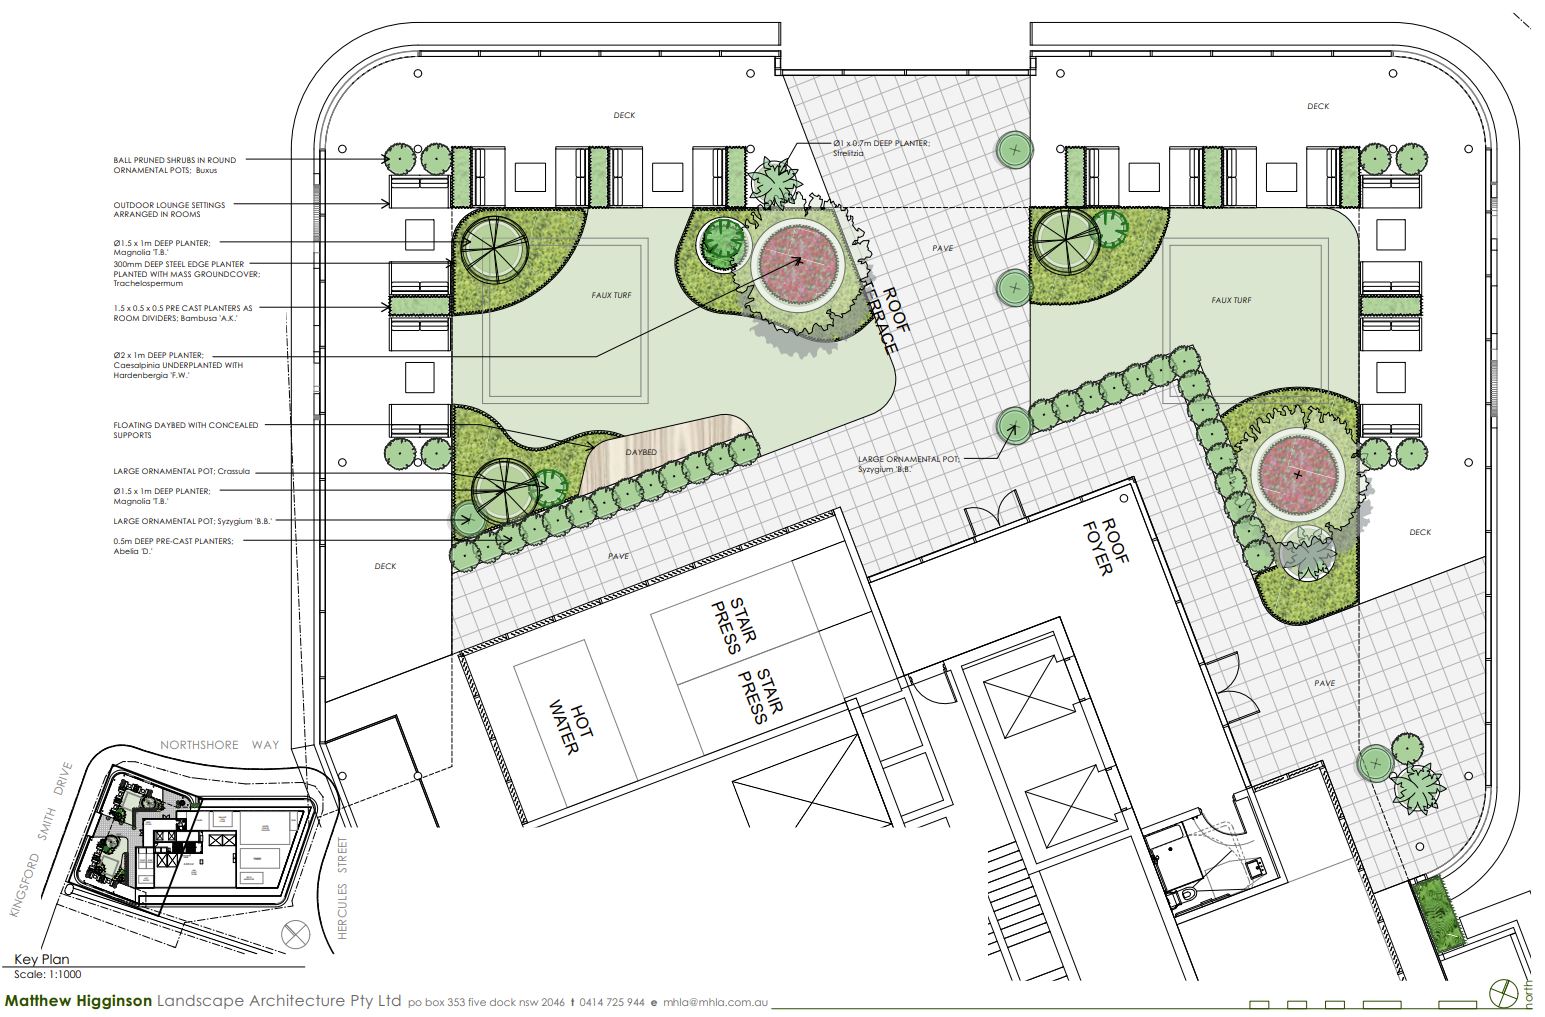 Proposed rooftop terrace